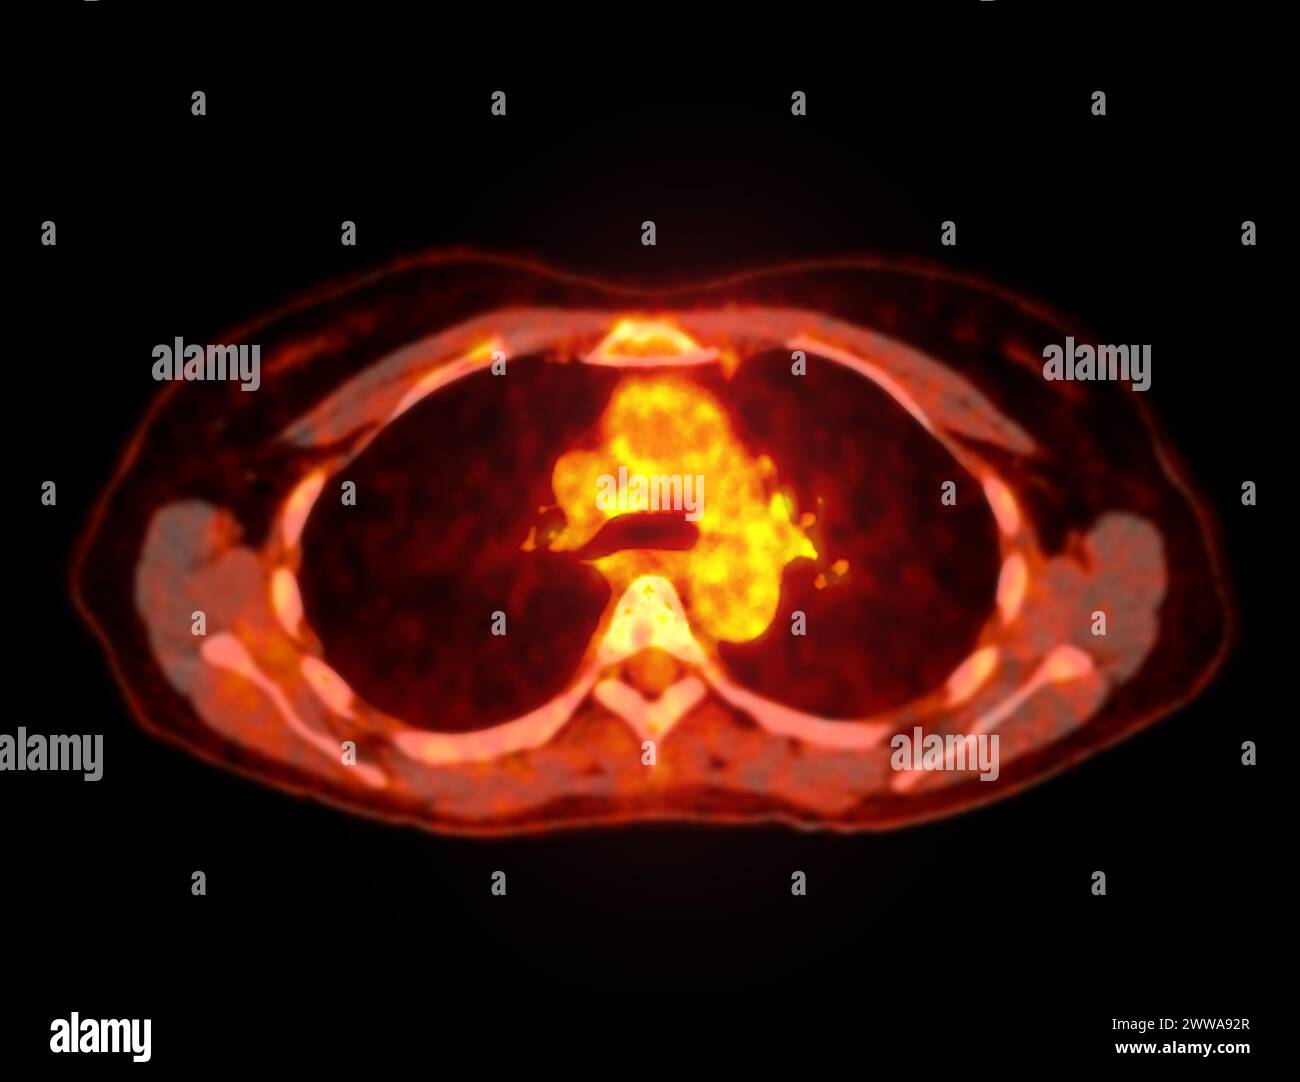 A PET-CT scan image is a diagnostic visualization combining Positron Emission Tomography (PET) and Computed Tomography (CT) for Helps in finding cance Stock Photo